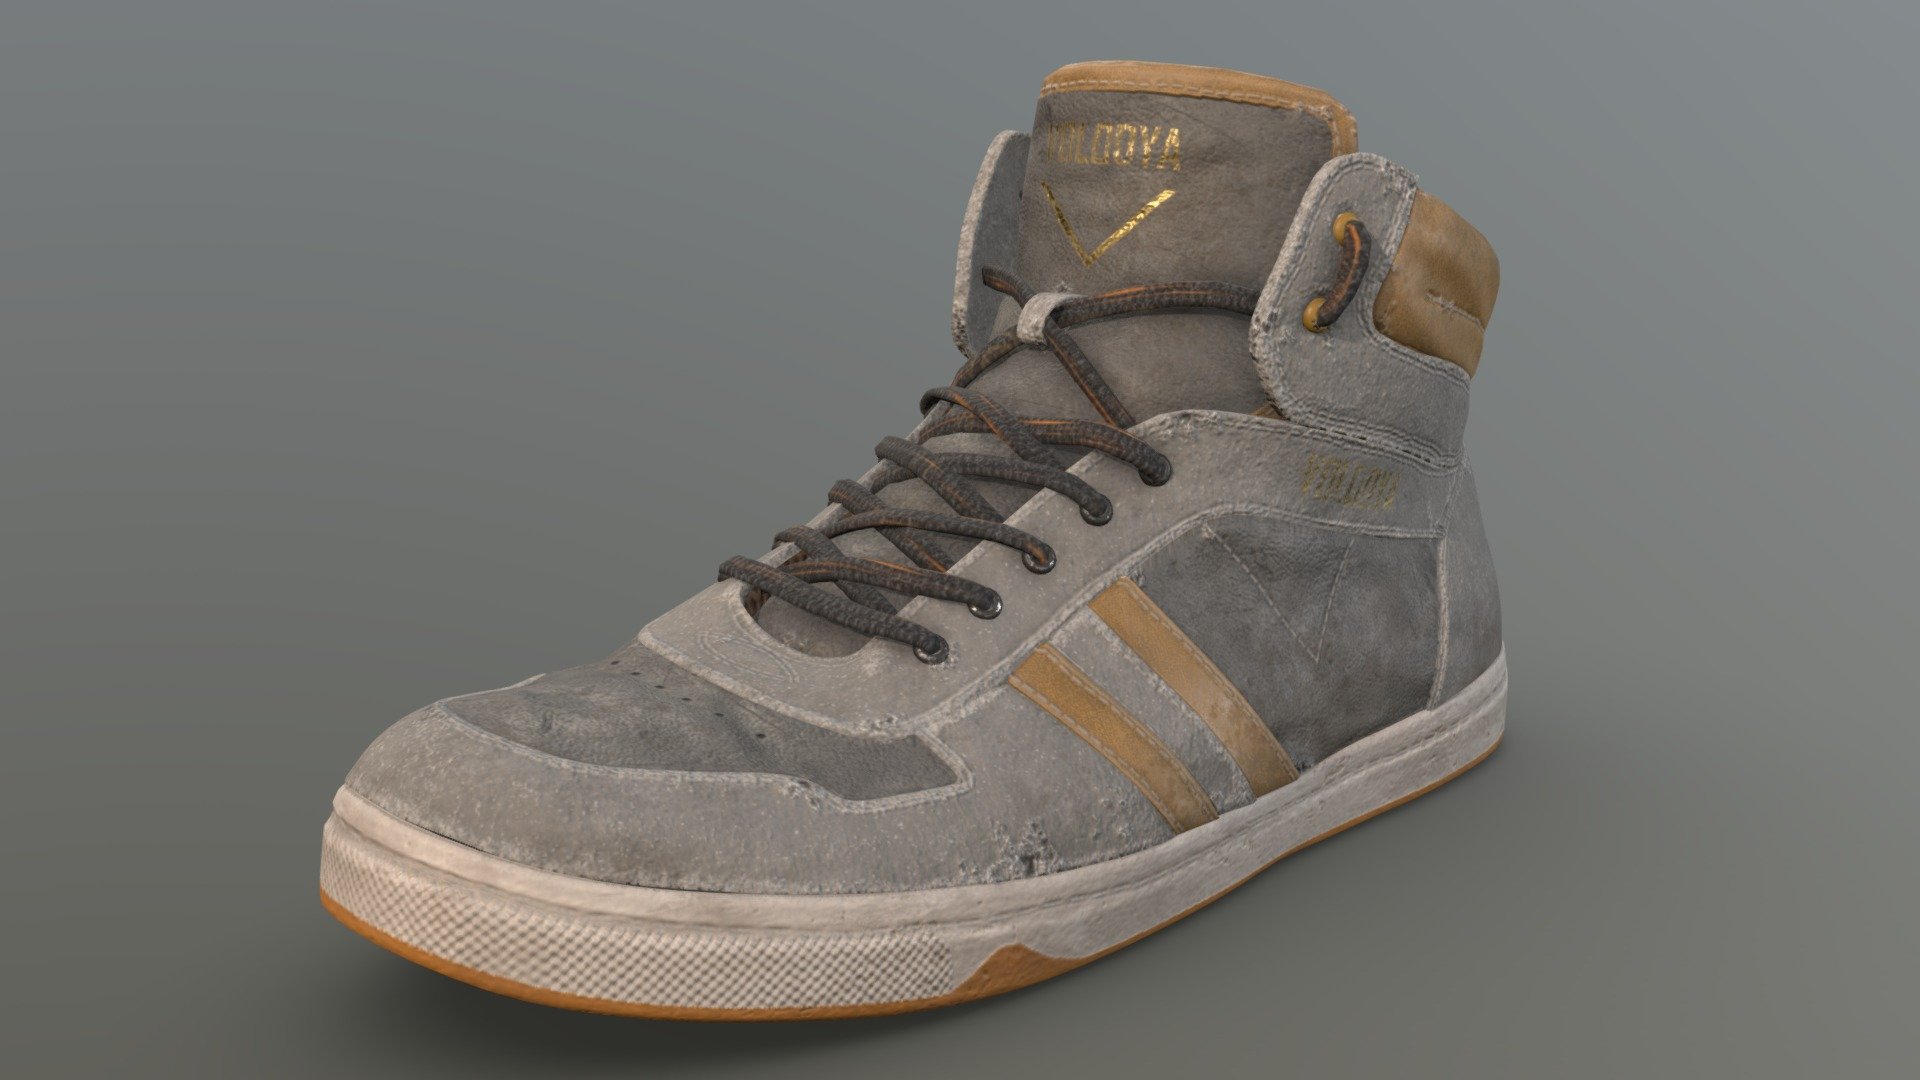 Textured in Substance Painter

Based on “Leather Shoes” by kenprol, licensed under CC Attribution-NonCommercial” - Used Gray Shoe (ShoesTexturingChallenge) - Download Free 3D model by wolkoed 3d model